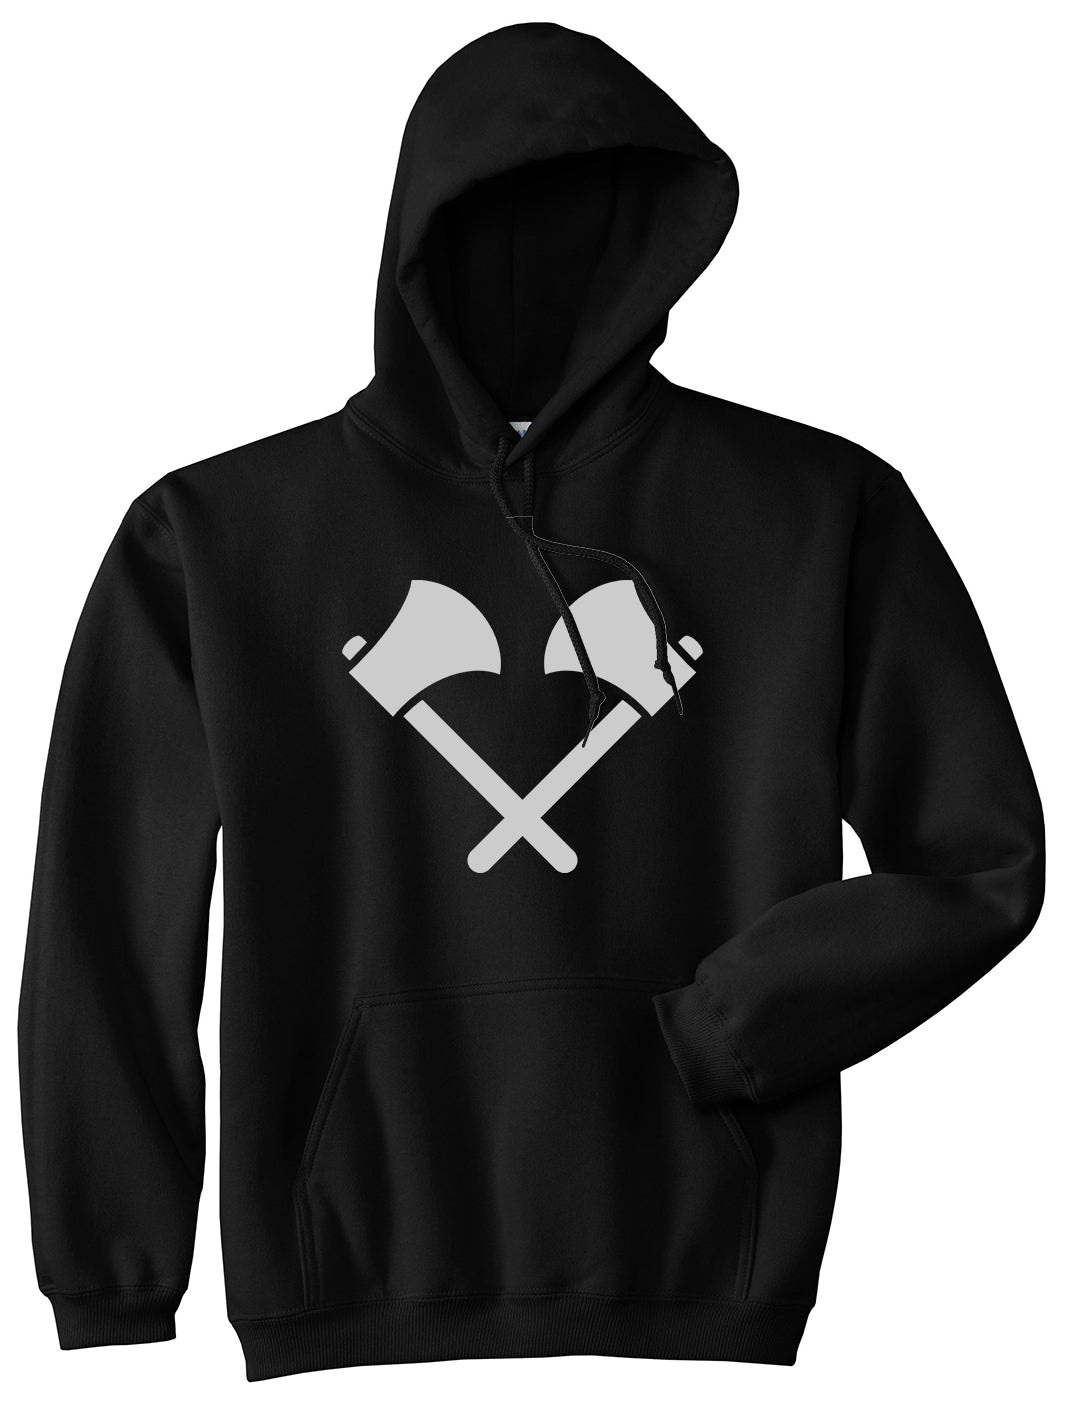 2 Ax Fireman Logo Black Pullover Hoodie by Kings Of NY